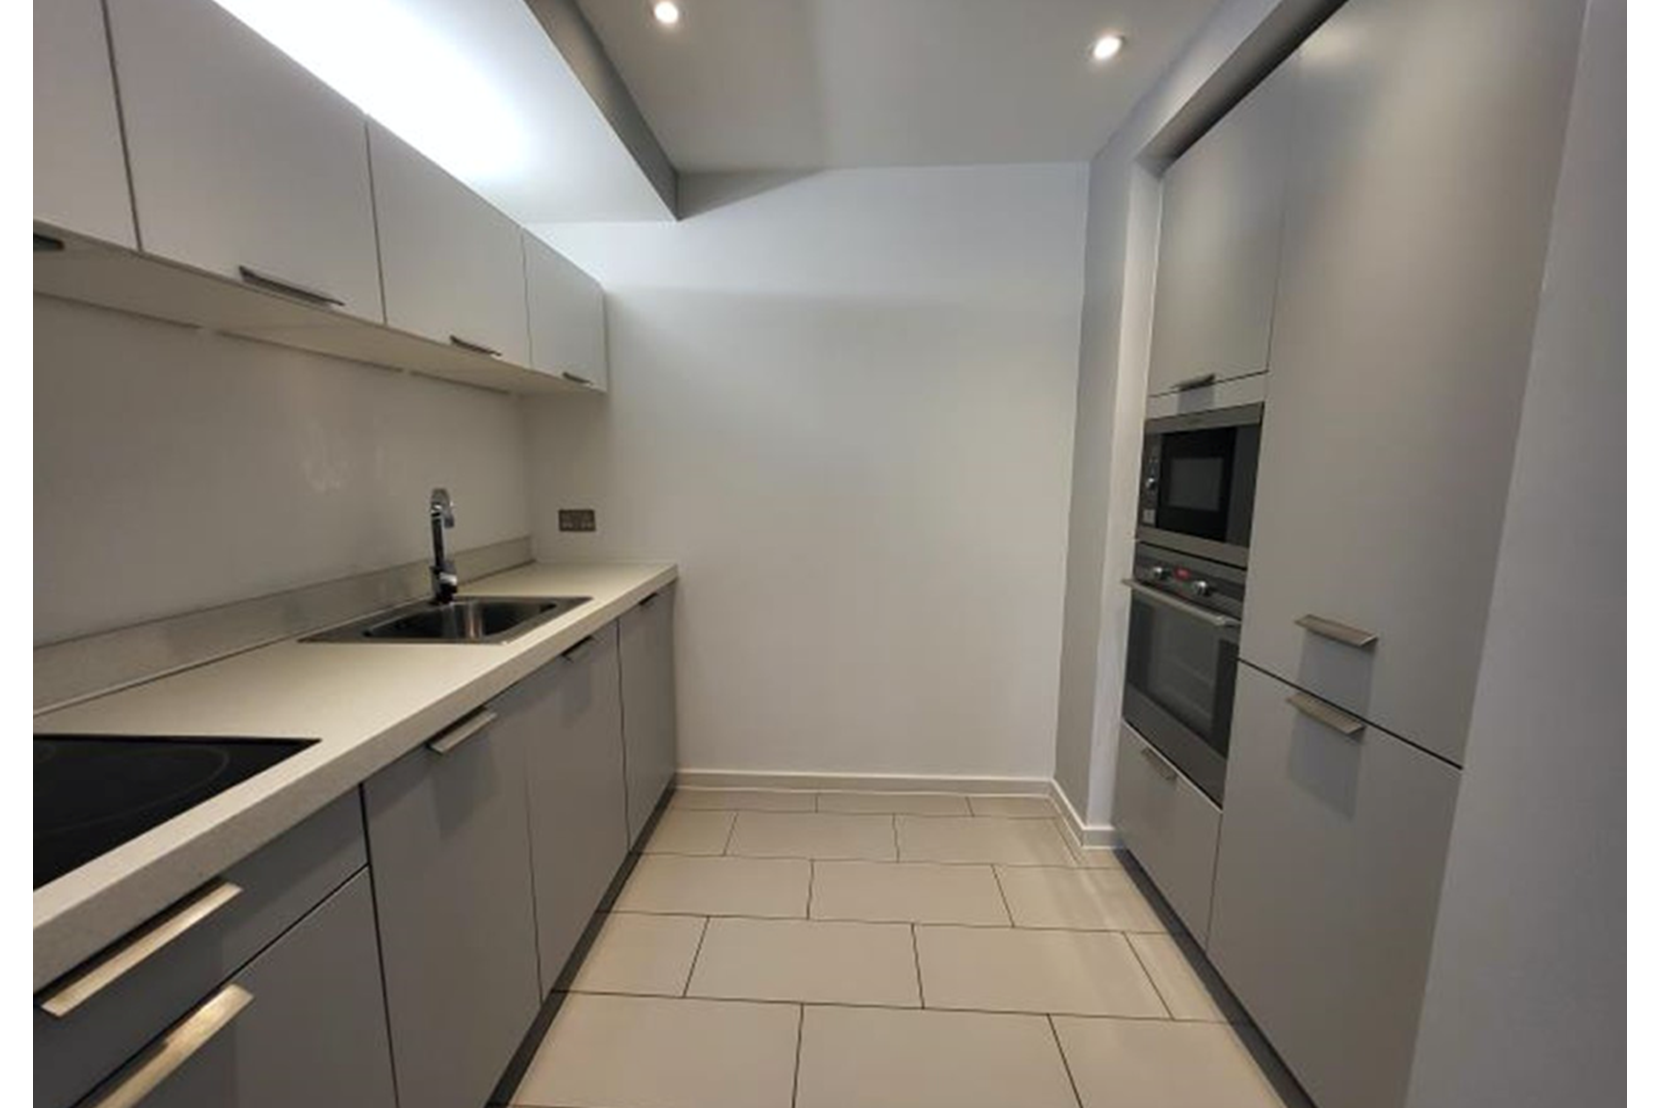 Apartments to Rent by Northern Group at Ice Plant, Manchester, M4, kitchen